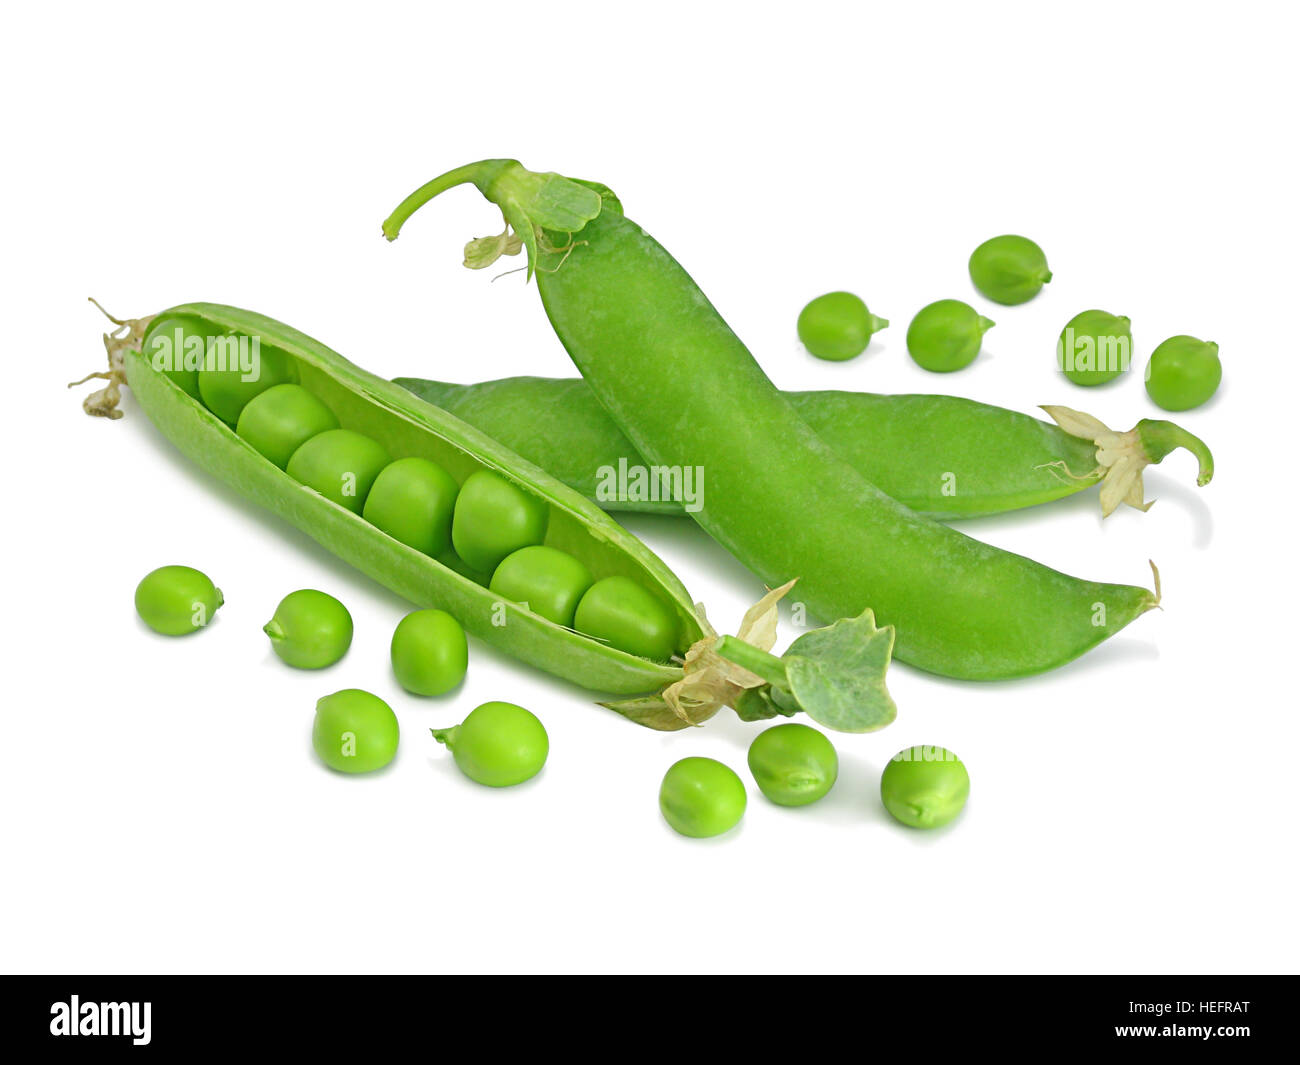 Sweet peas. Fresh pea pods isolated on white background. One pea pod is open. Stock Photo